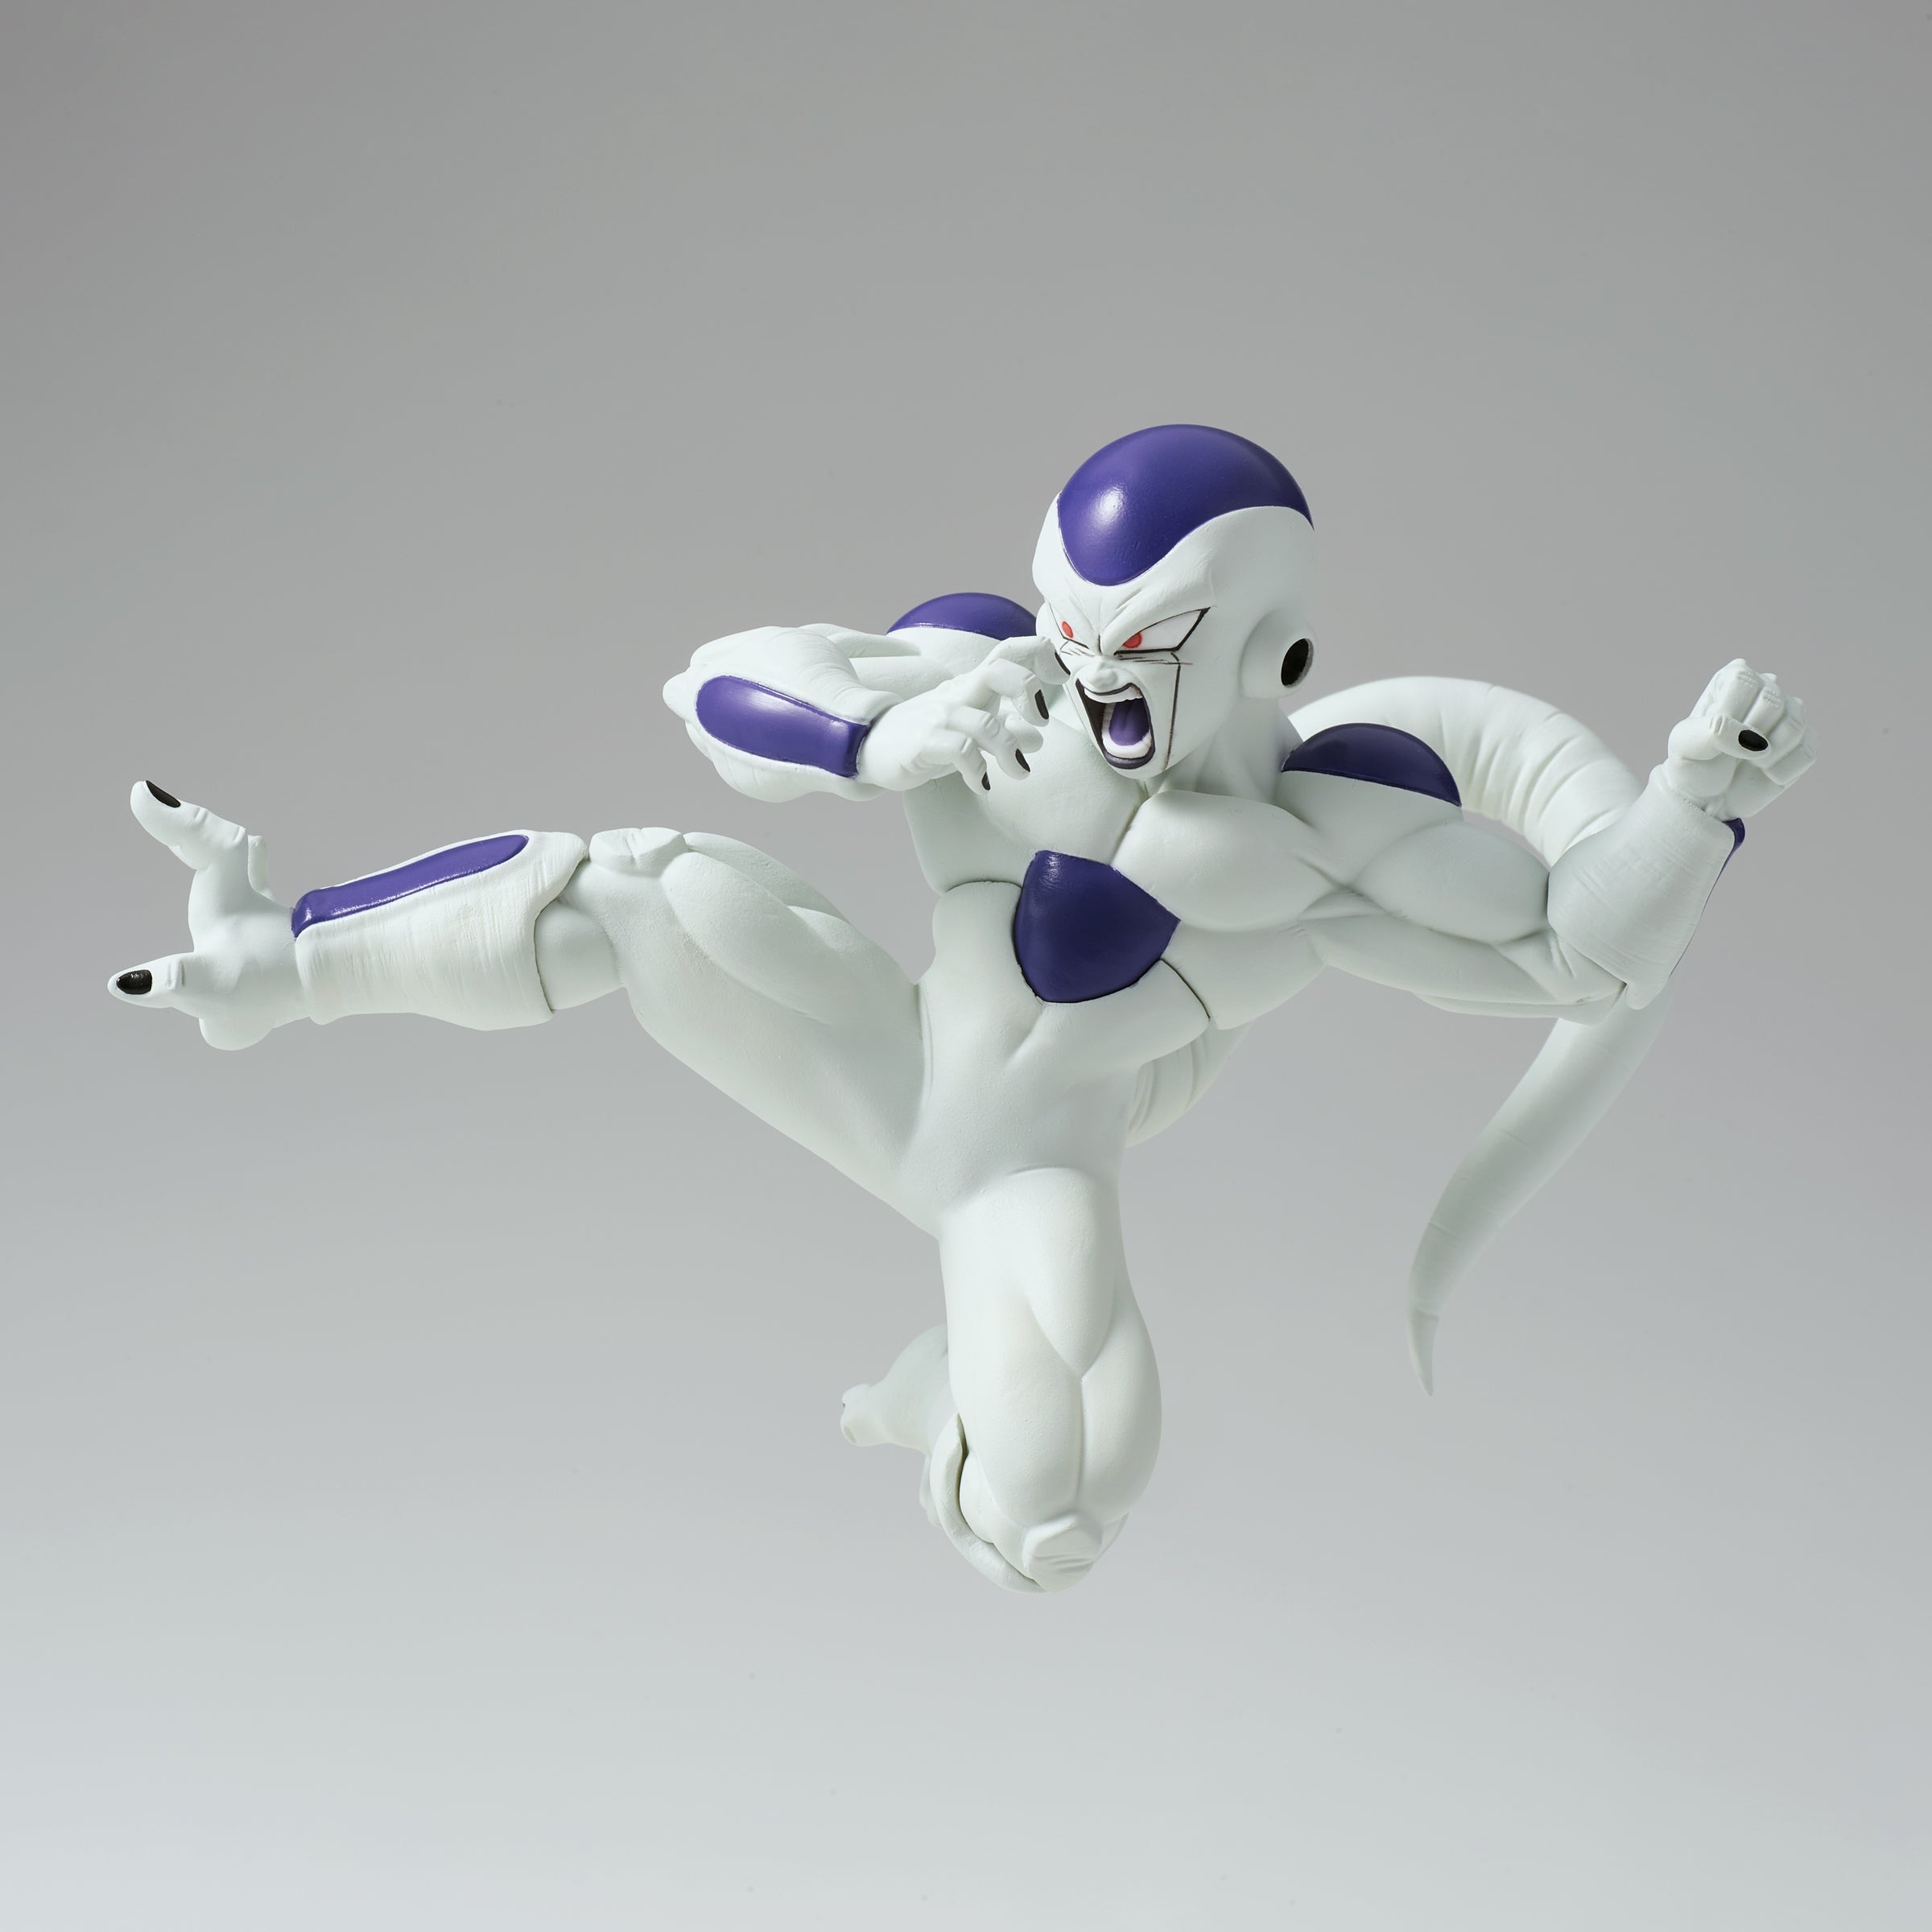 Dragon Ball Z Match Makers Frieza Fig - State of Comics